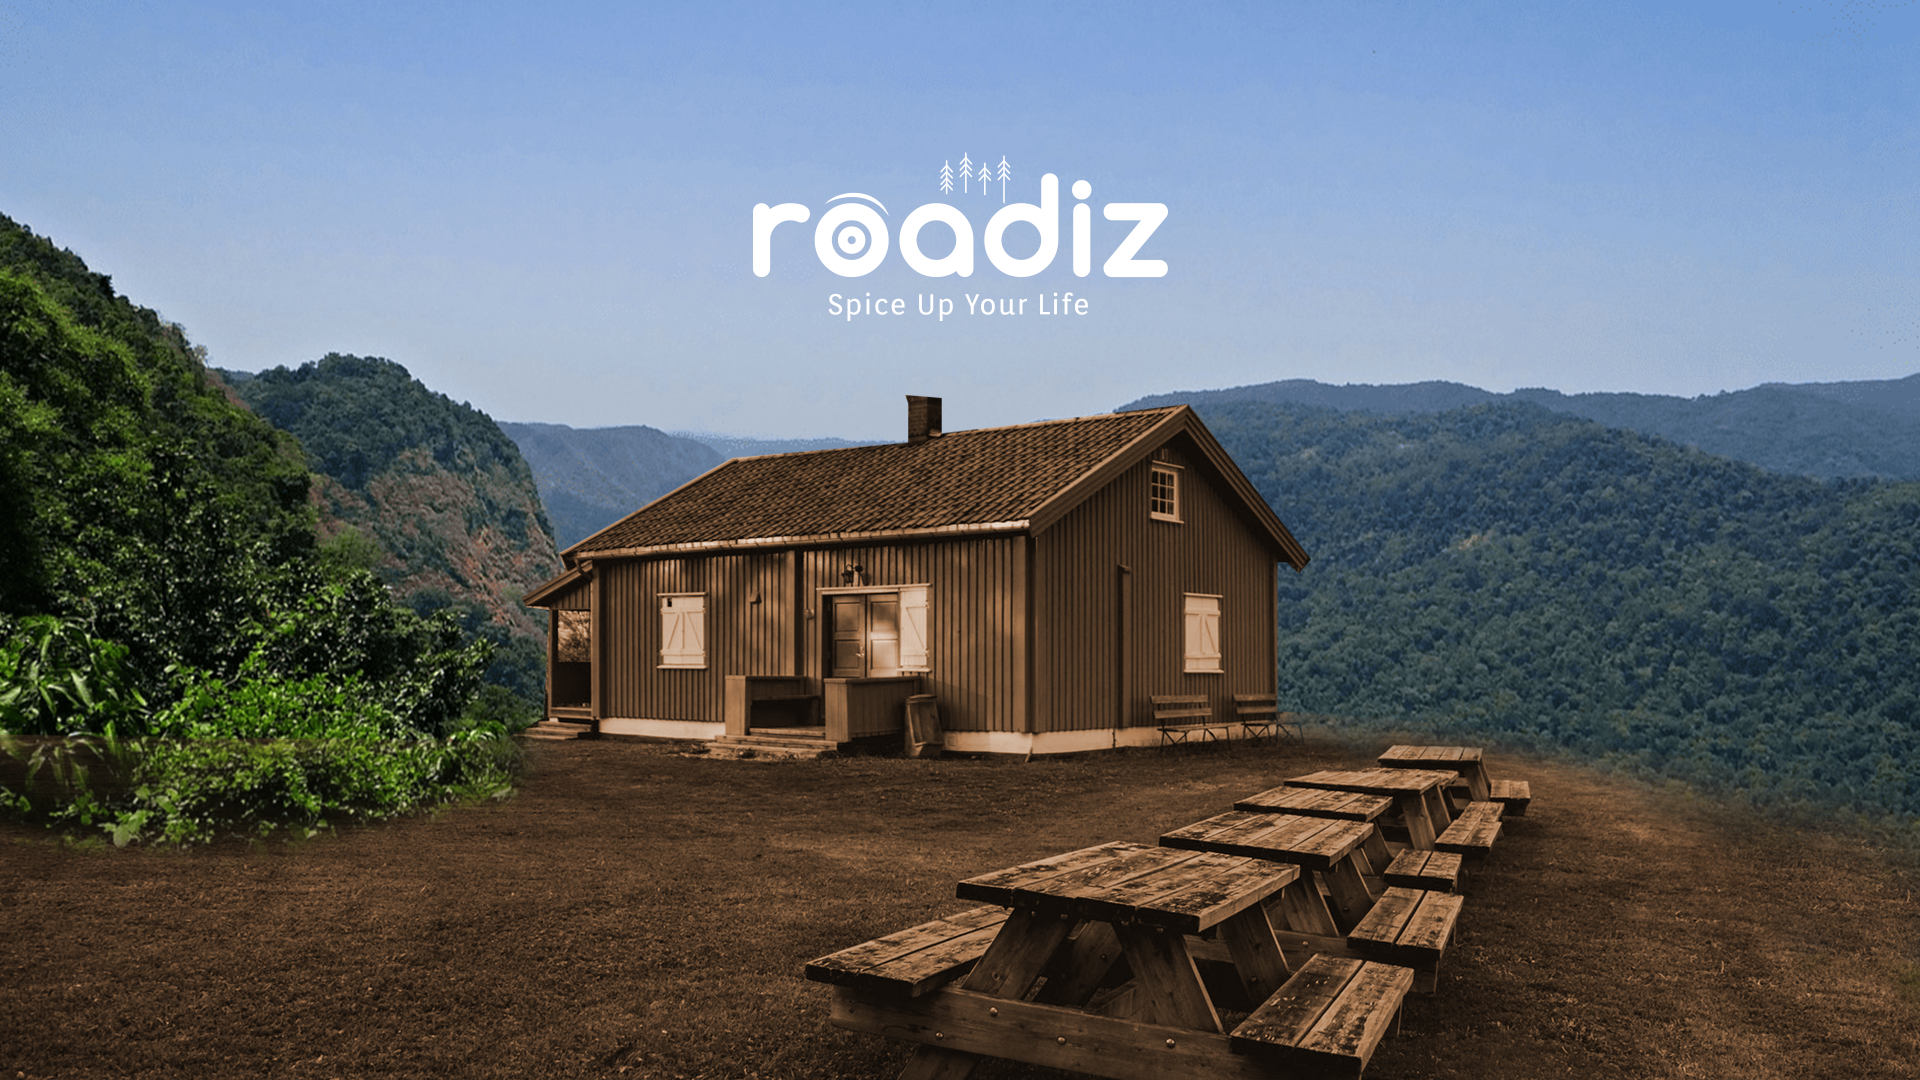 Is My Property Right for Roadiz Campsite?